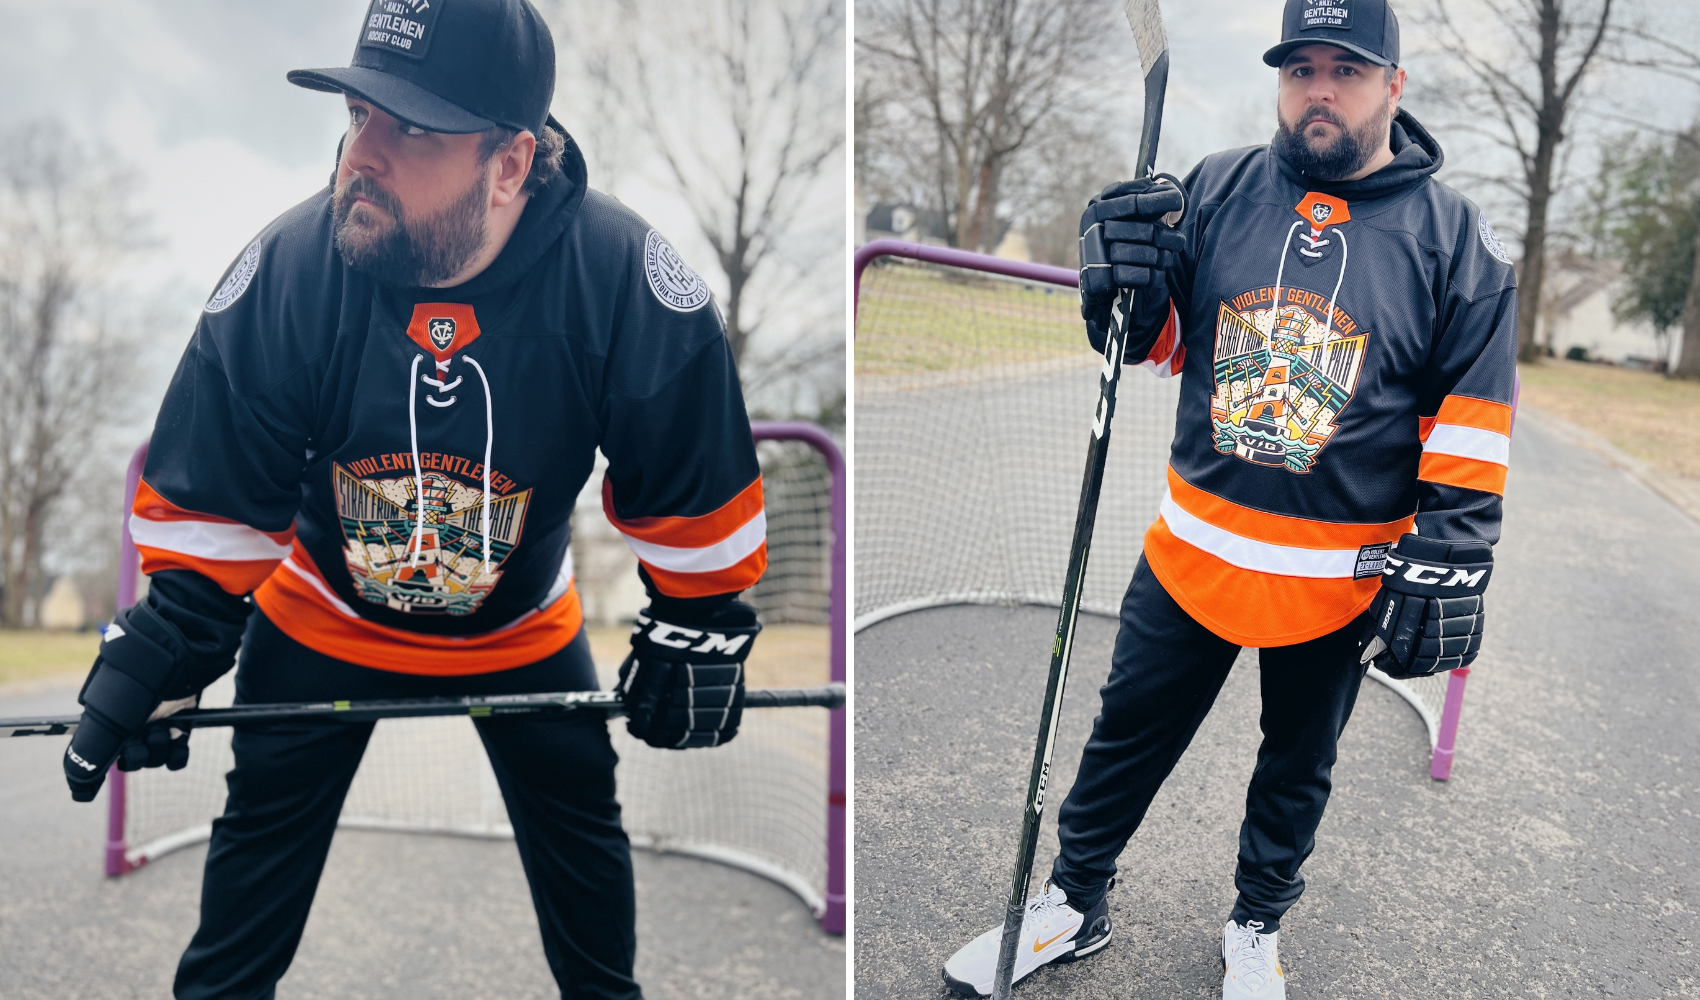 Lifetipsforbetterliving Hockey Clothing Company Hockey Club  new releases available now - new collaboration with music group Stray From The Path - perfect for any hockey player off the ice